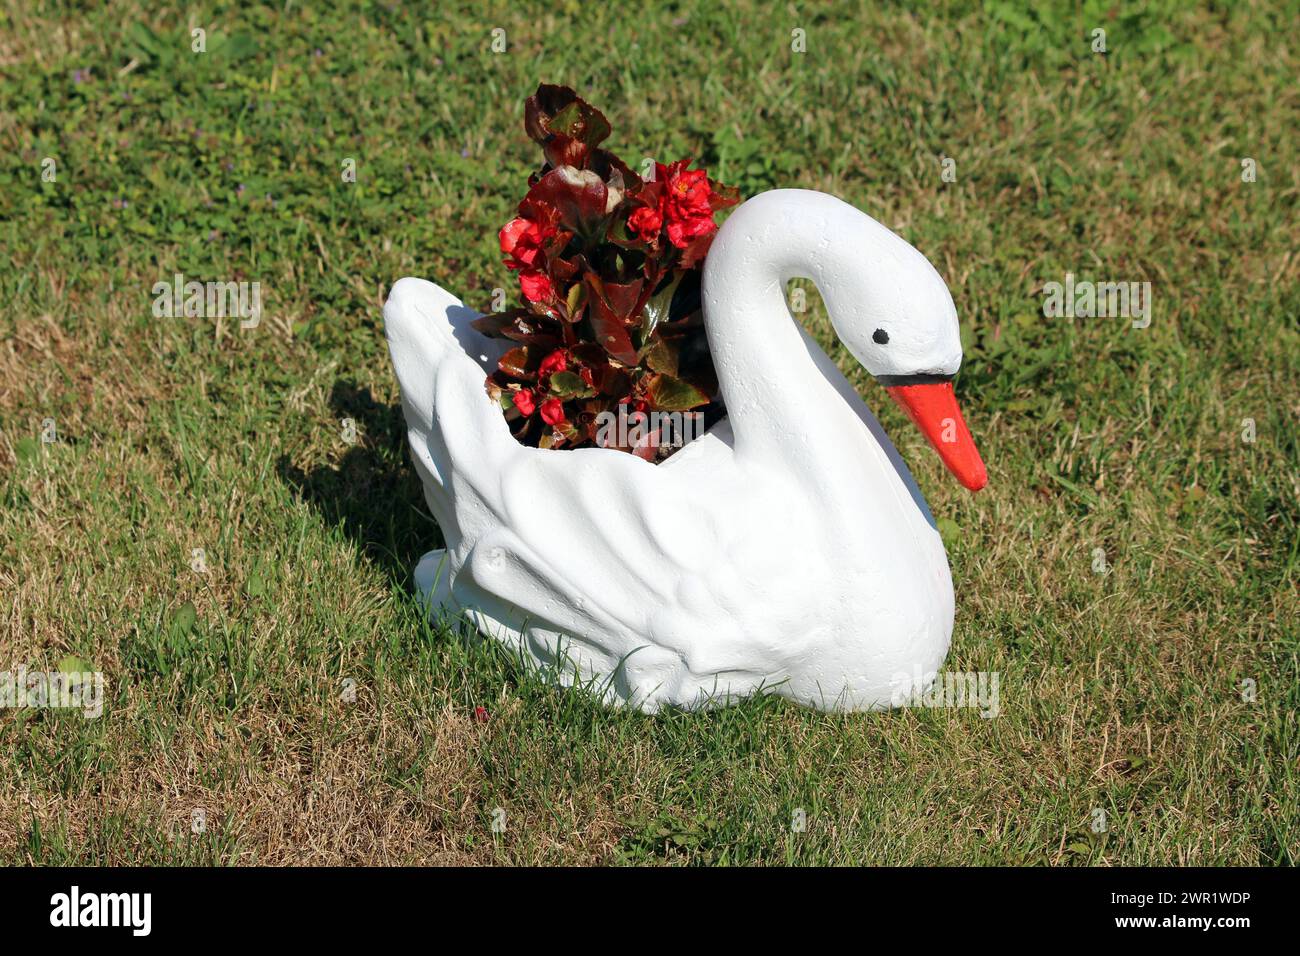 Freshly painted new handmade concrete garden decoration white swan with bright red beak filled with fresh dark red flowers mixed with leathery leaves Stock Photo